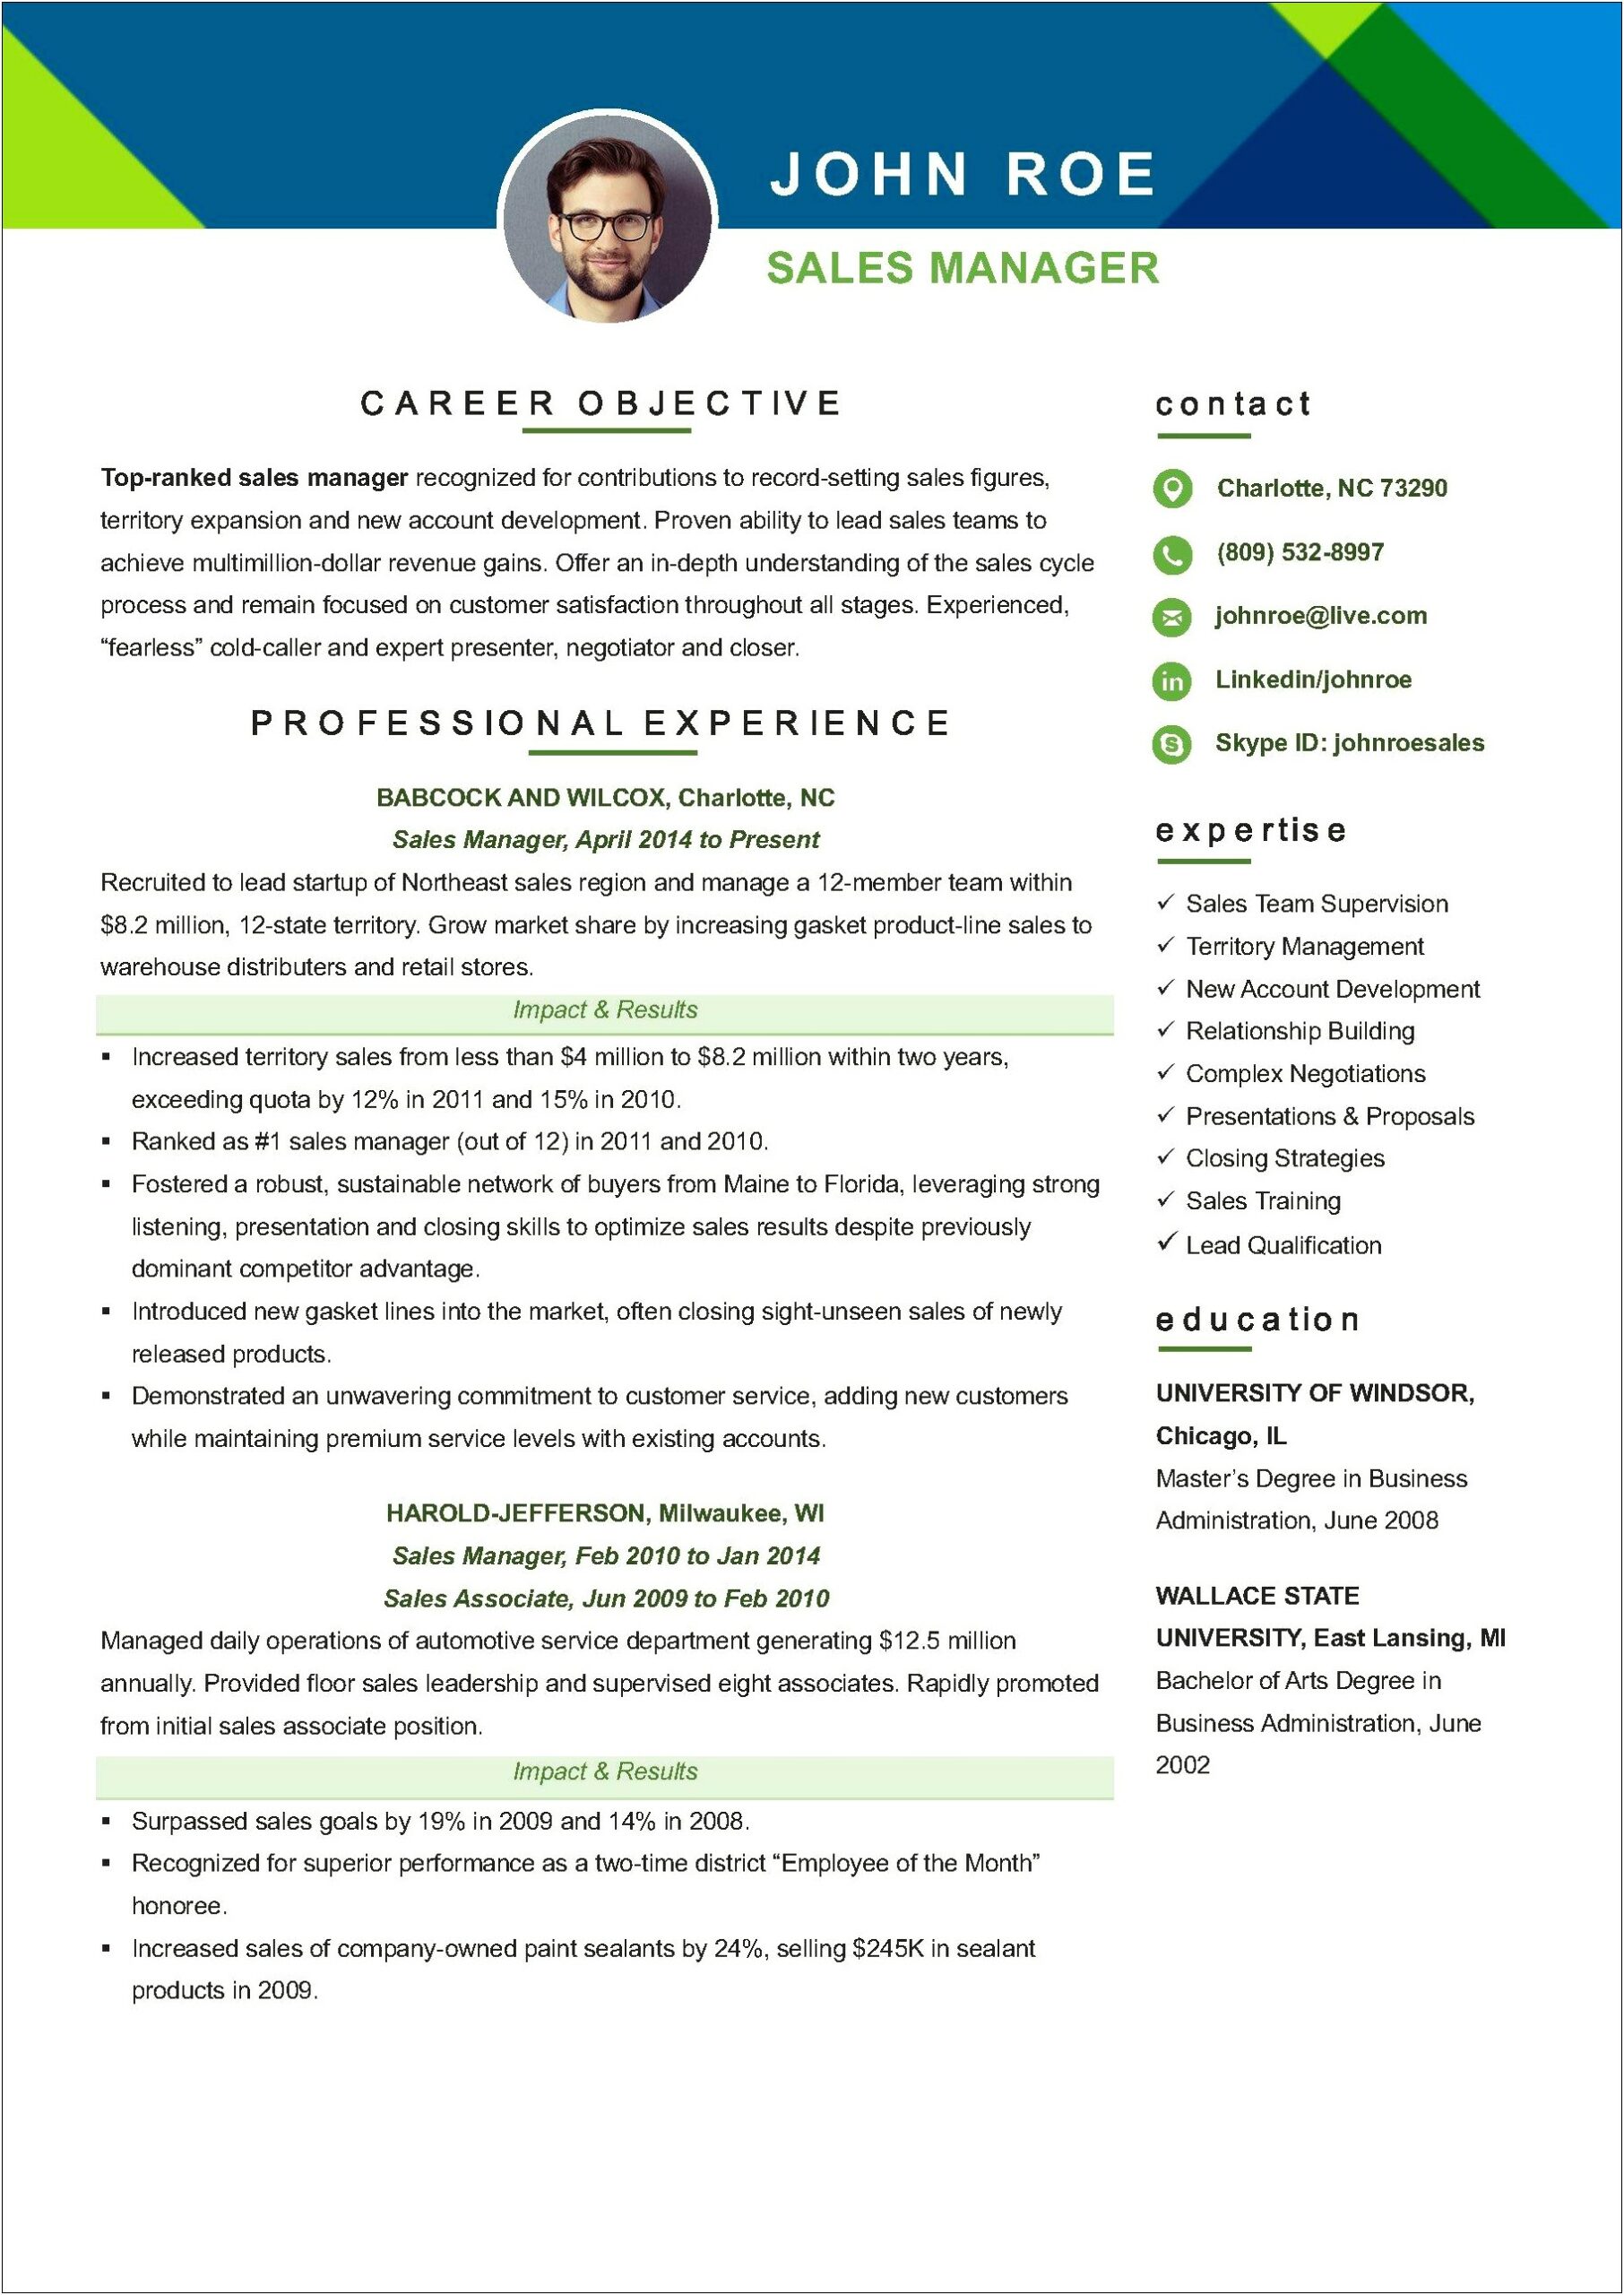 Free Resume Templates Sales Manager